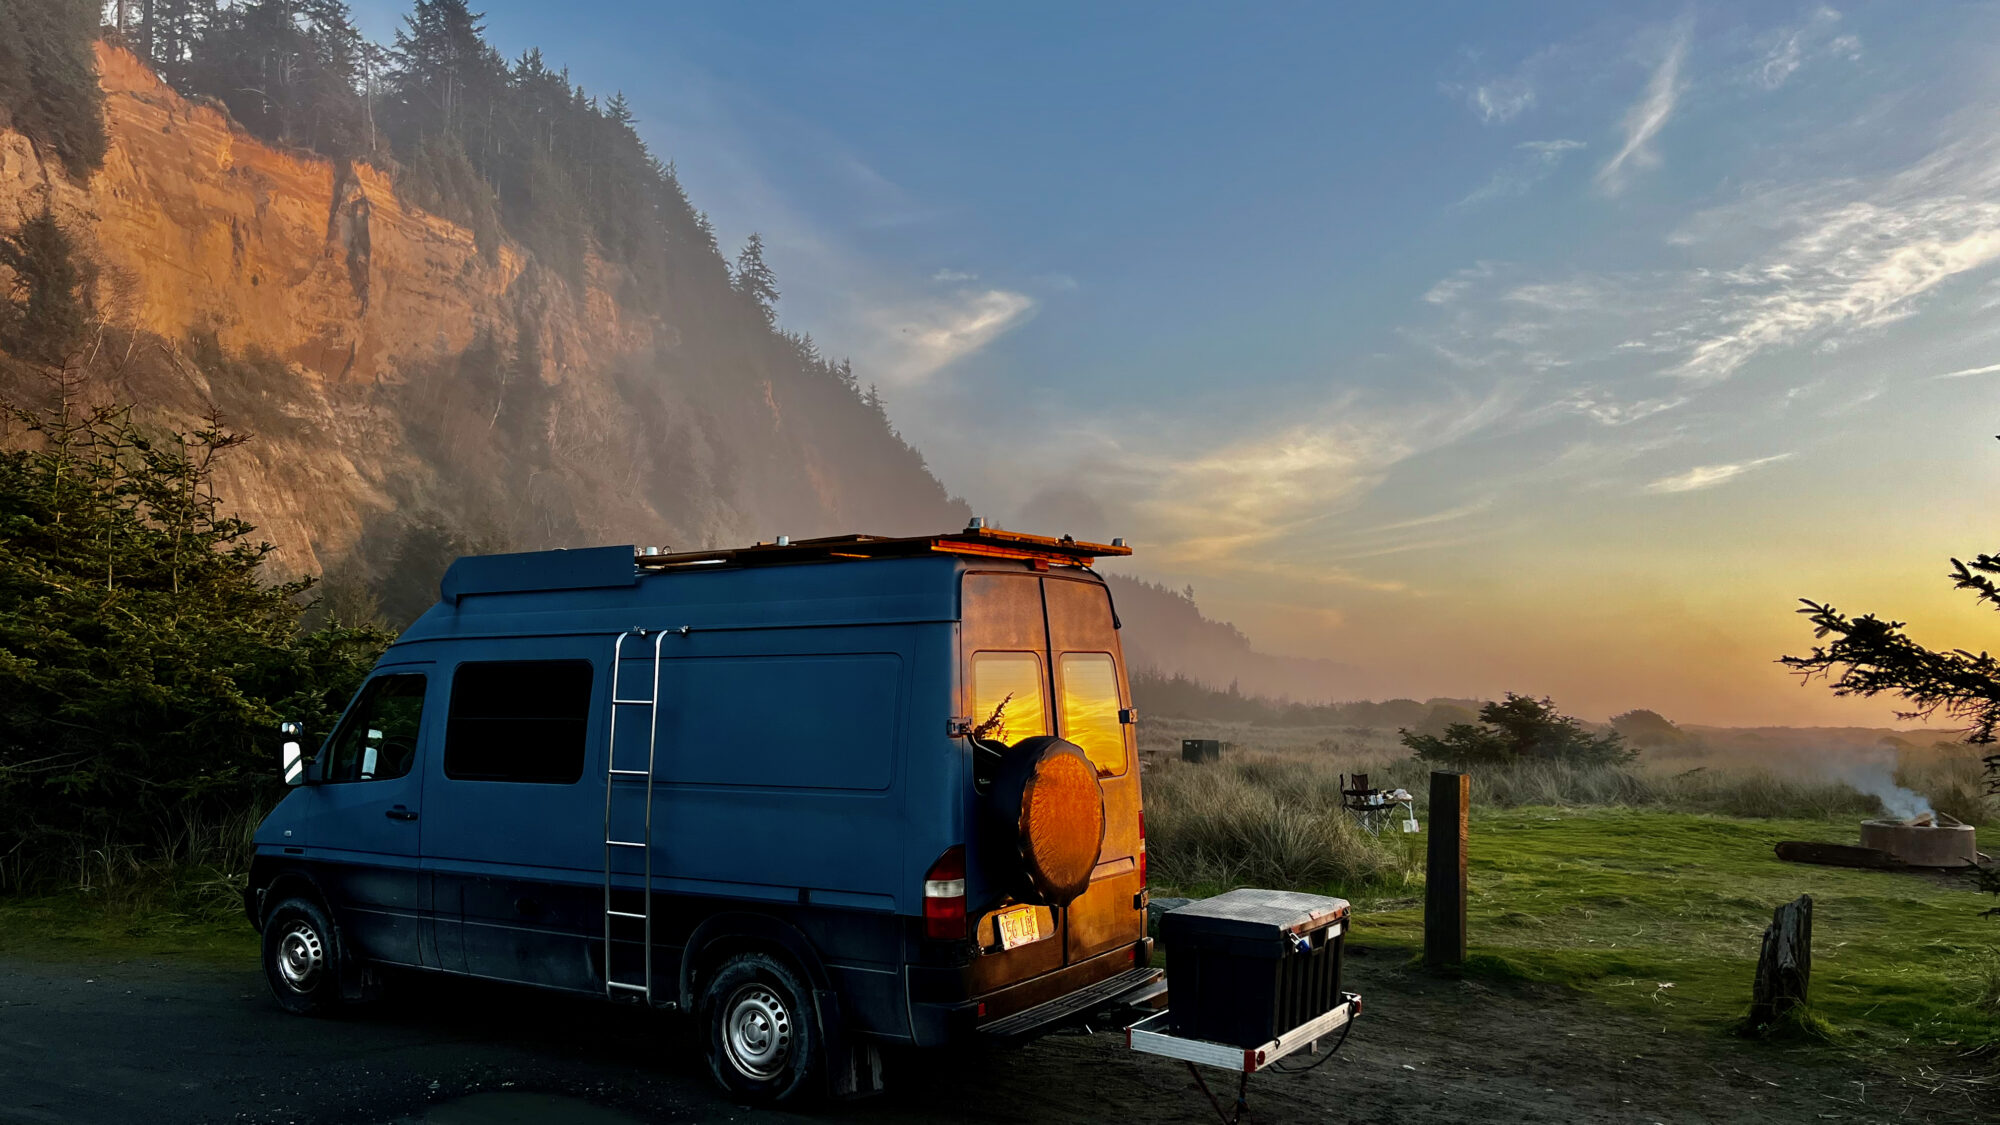 van is parked on a scenic overlook, with the sun casting a warm glow on a cliffside in the background. 